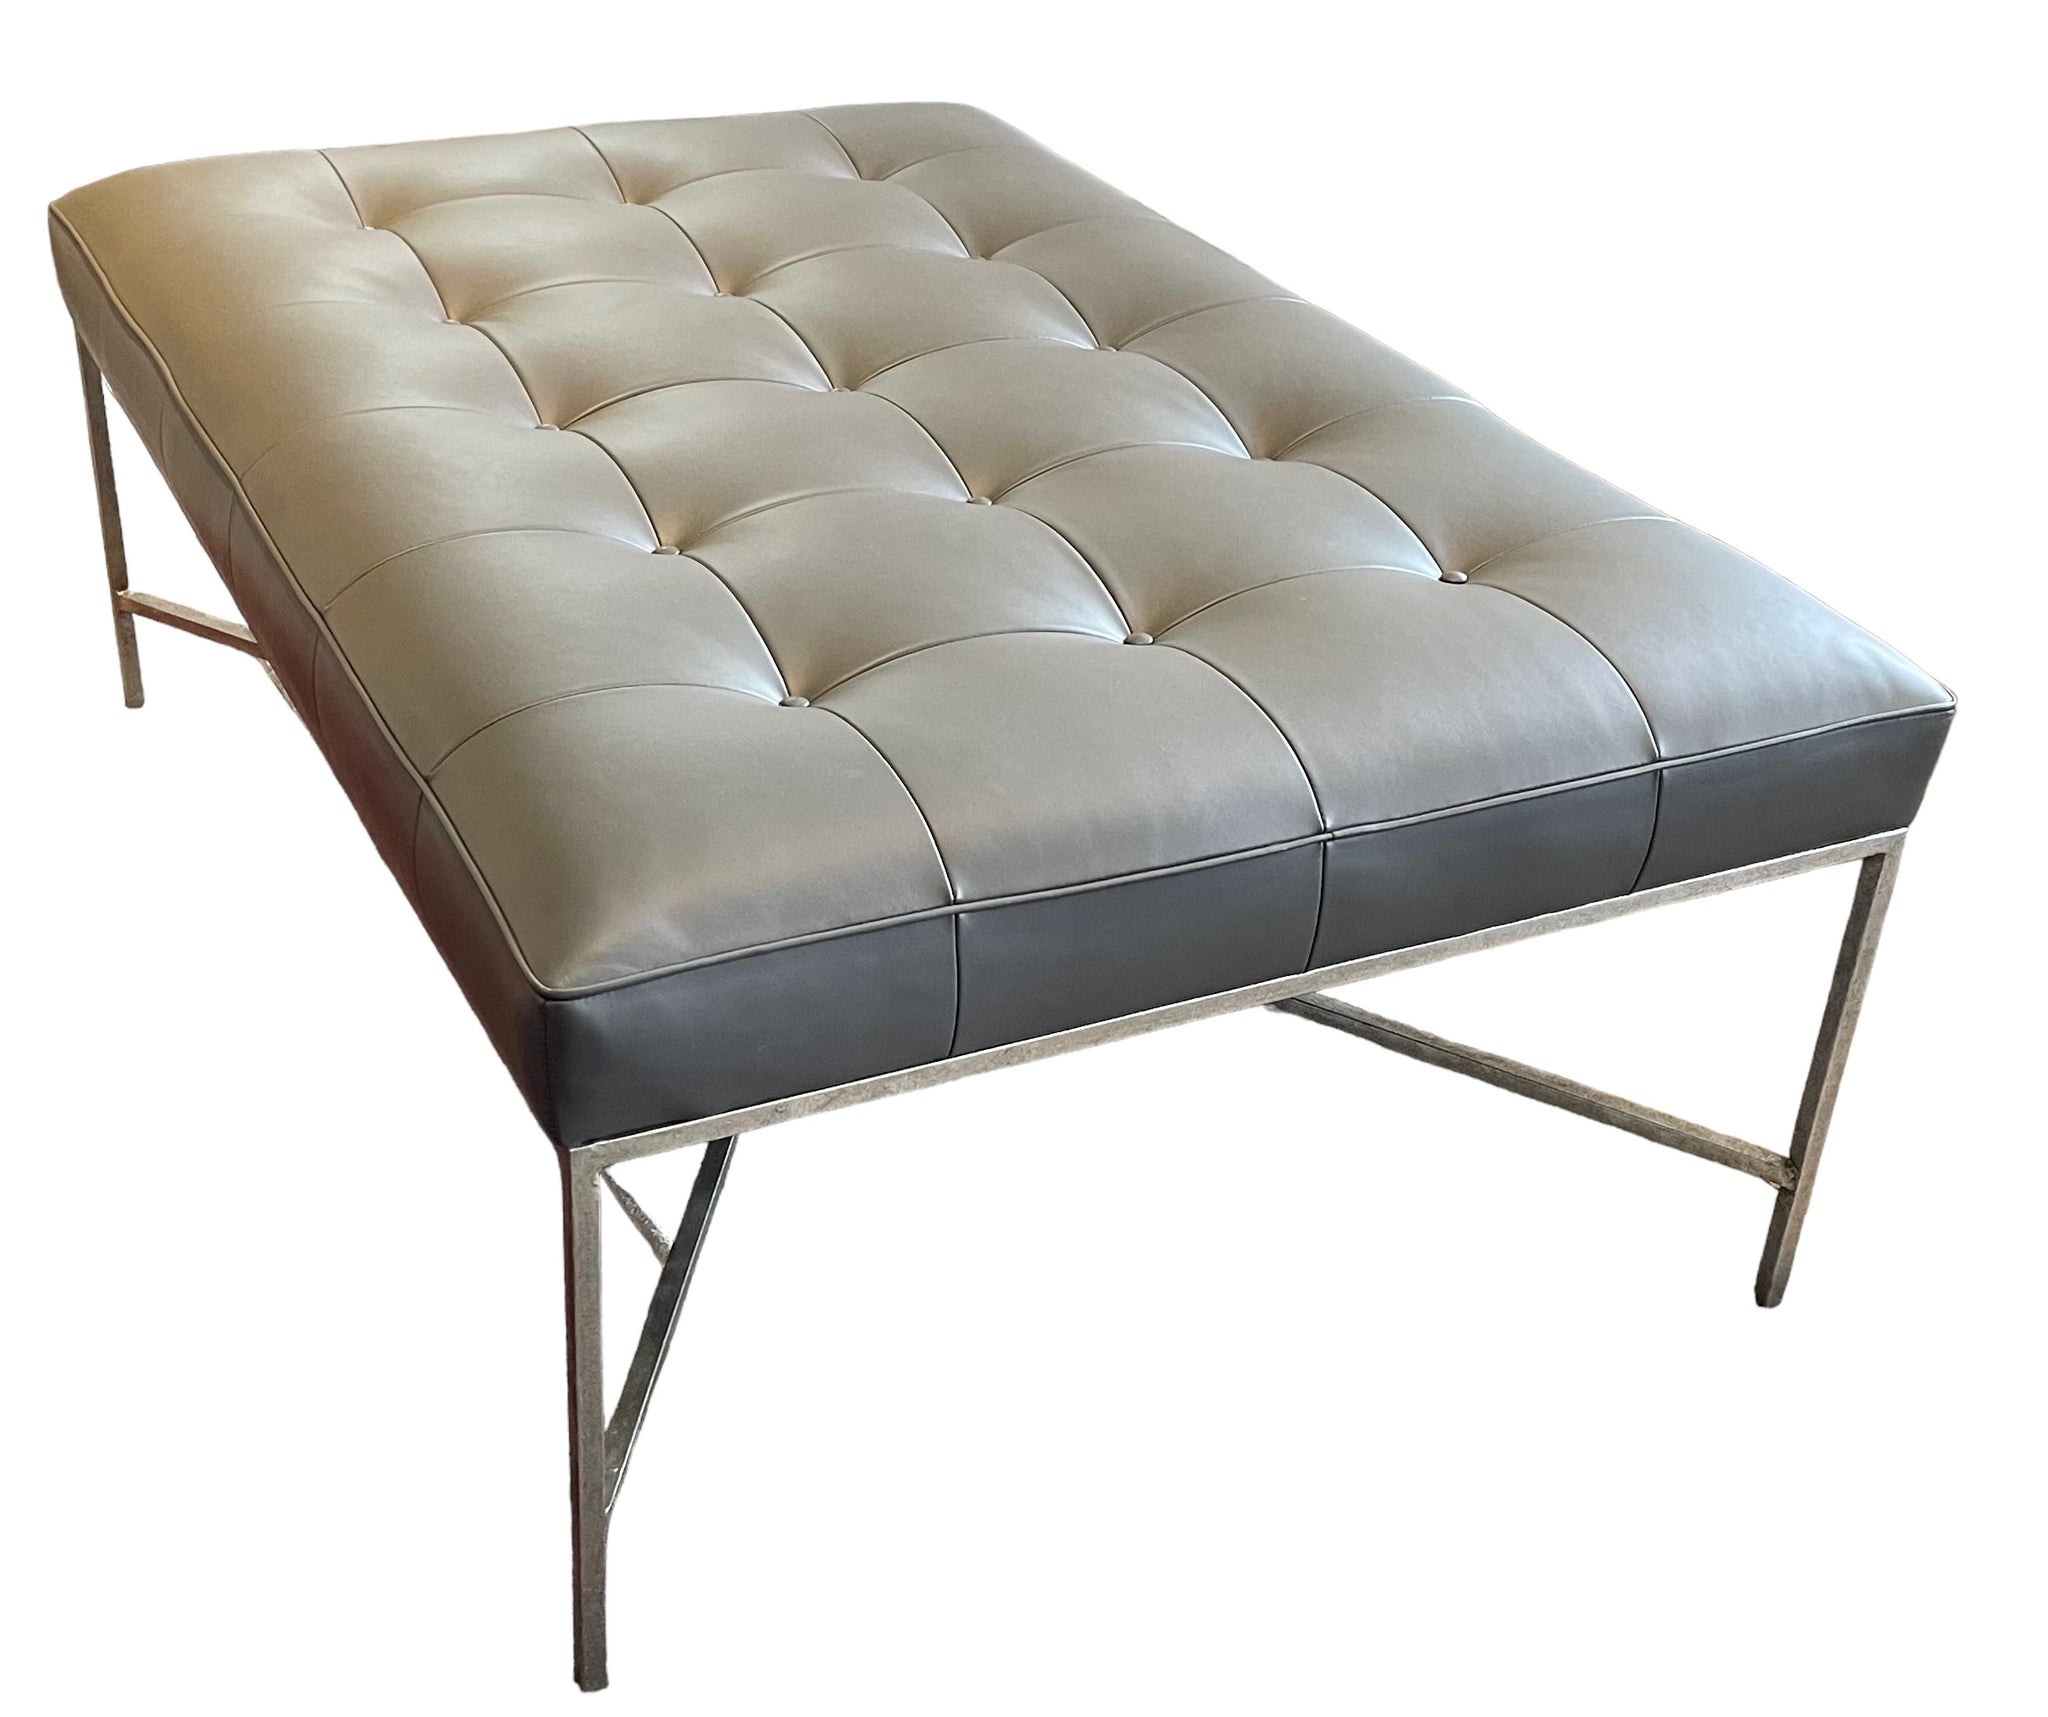 NEW Oly Jonathan Tufted Leather Ottoman